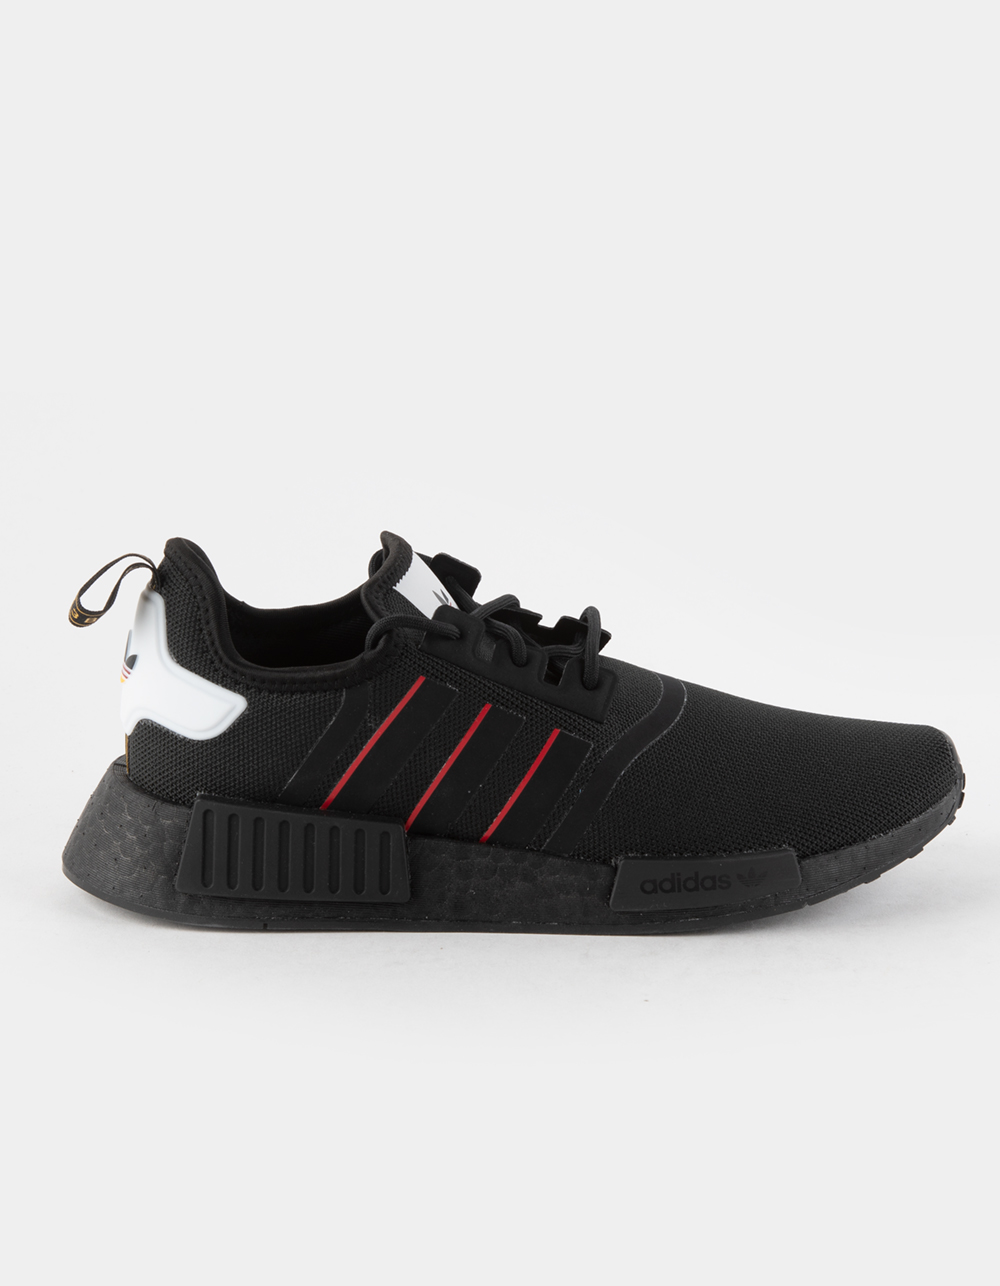 ADIDAS NMD_R1 Mens Shoes - BLK/RED | Tillys